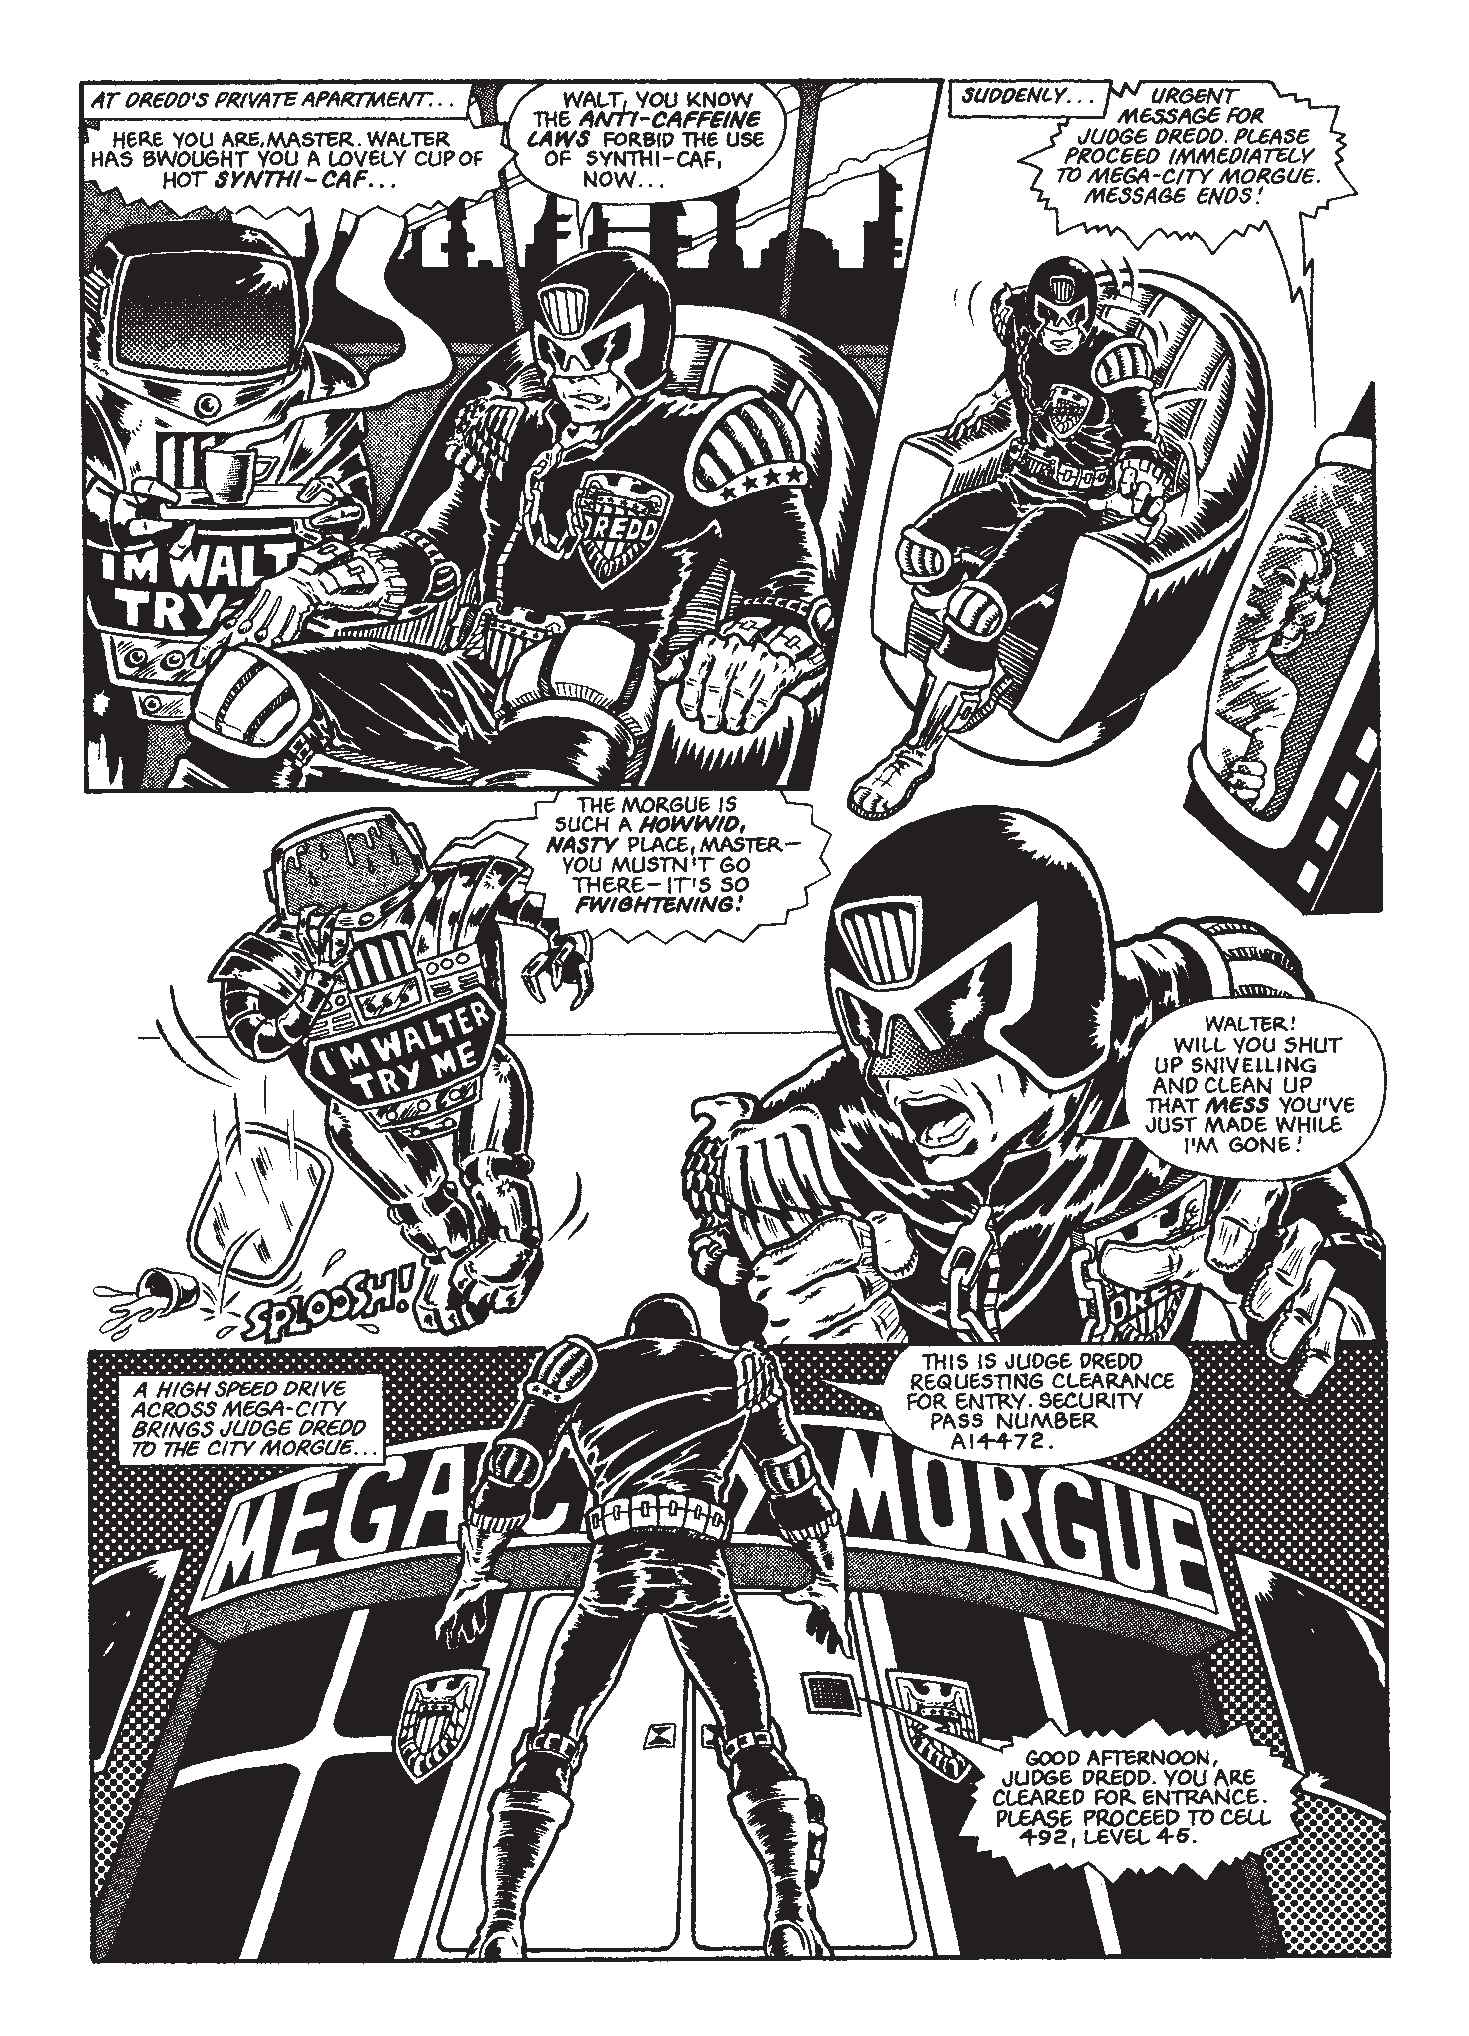 Read online Judge Dredd: The Restricted Files comic -  Issue # TPB 1 - 31